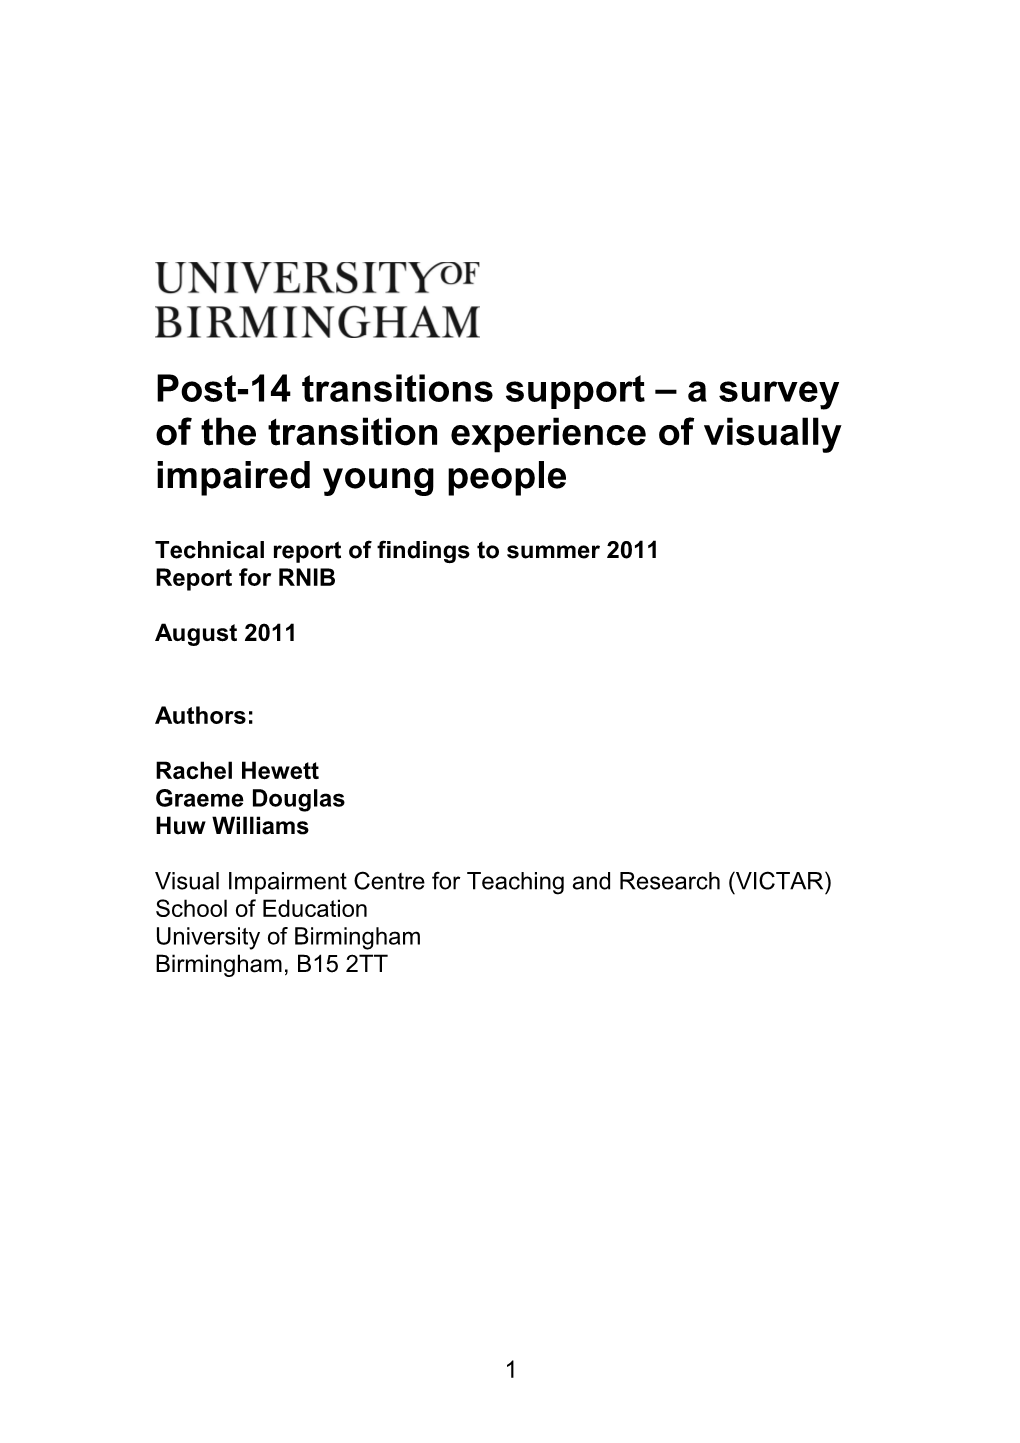 Post 14 Transitions Support 2011, a Survey of Experience